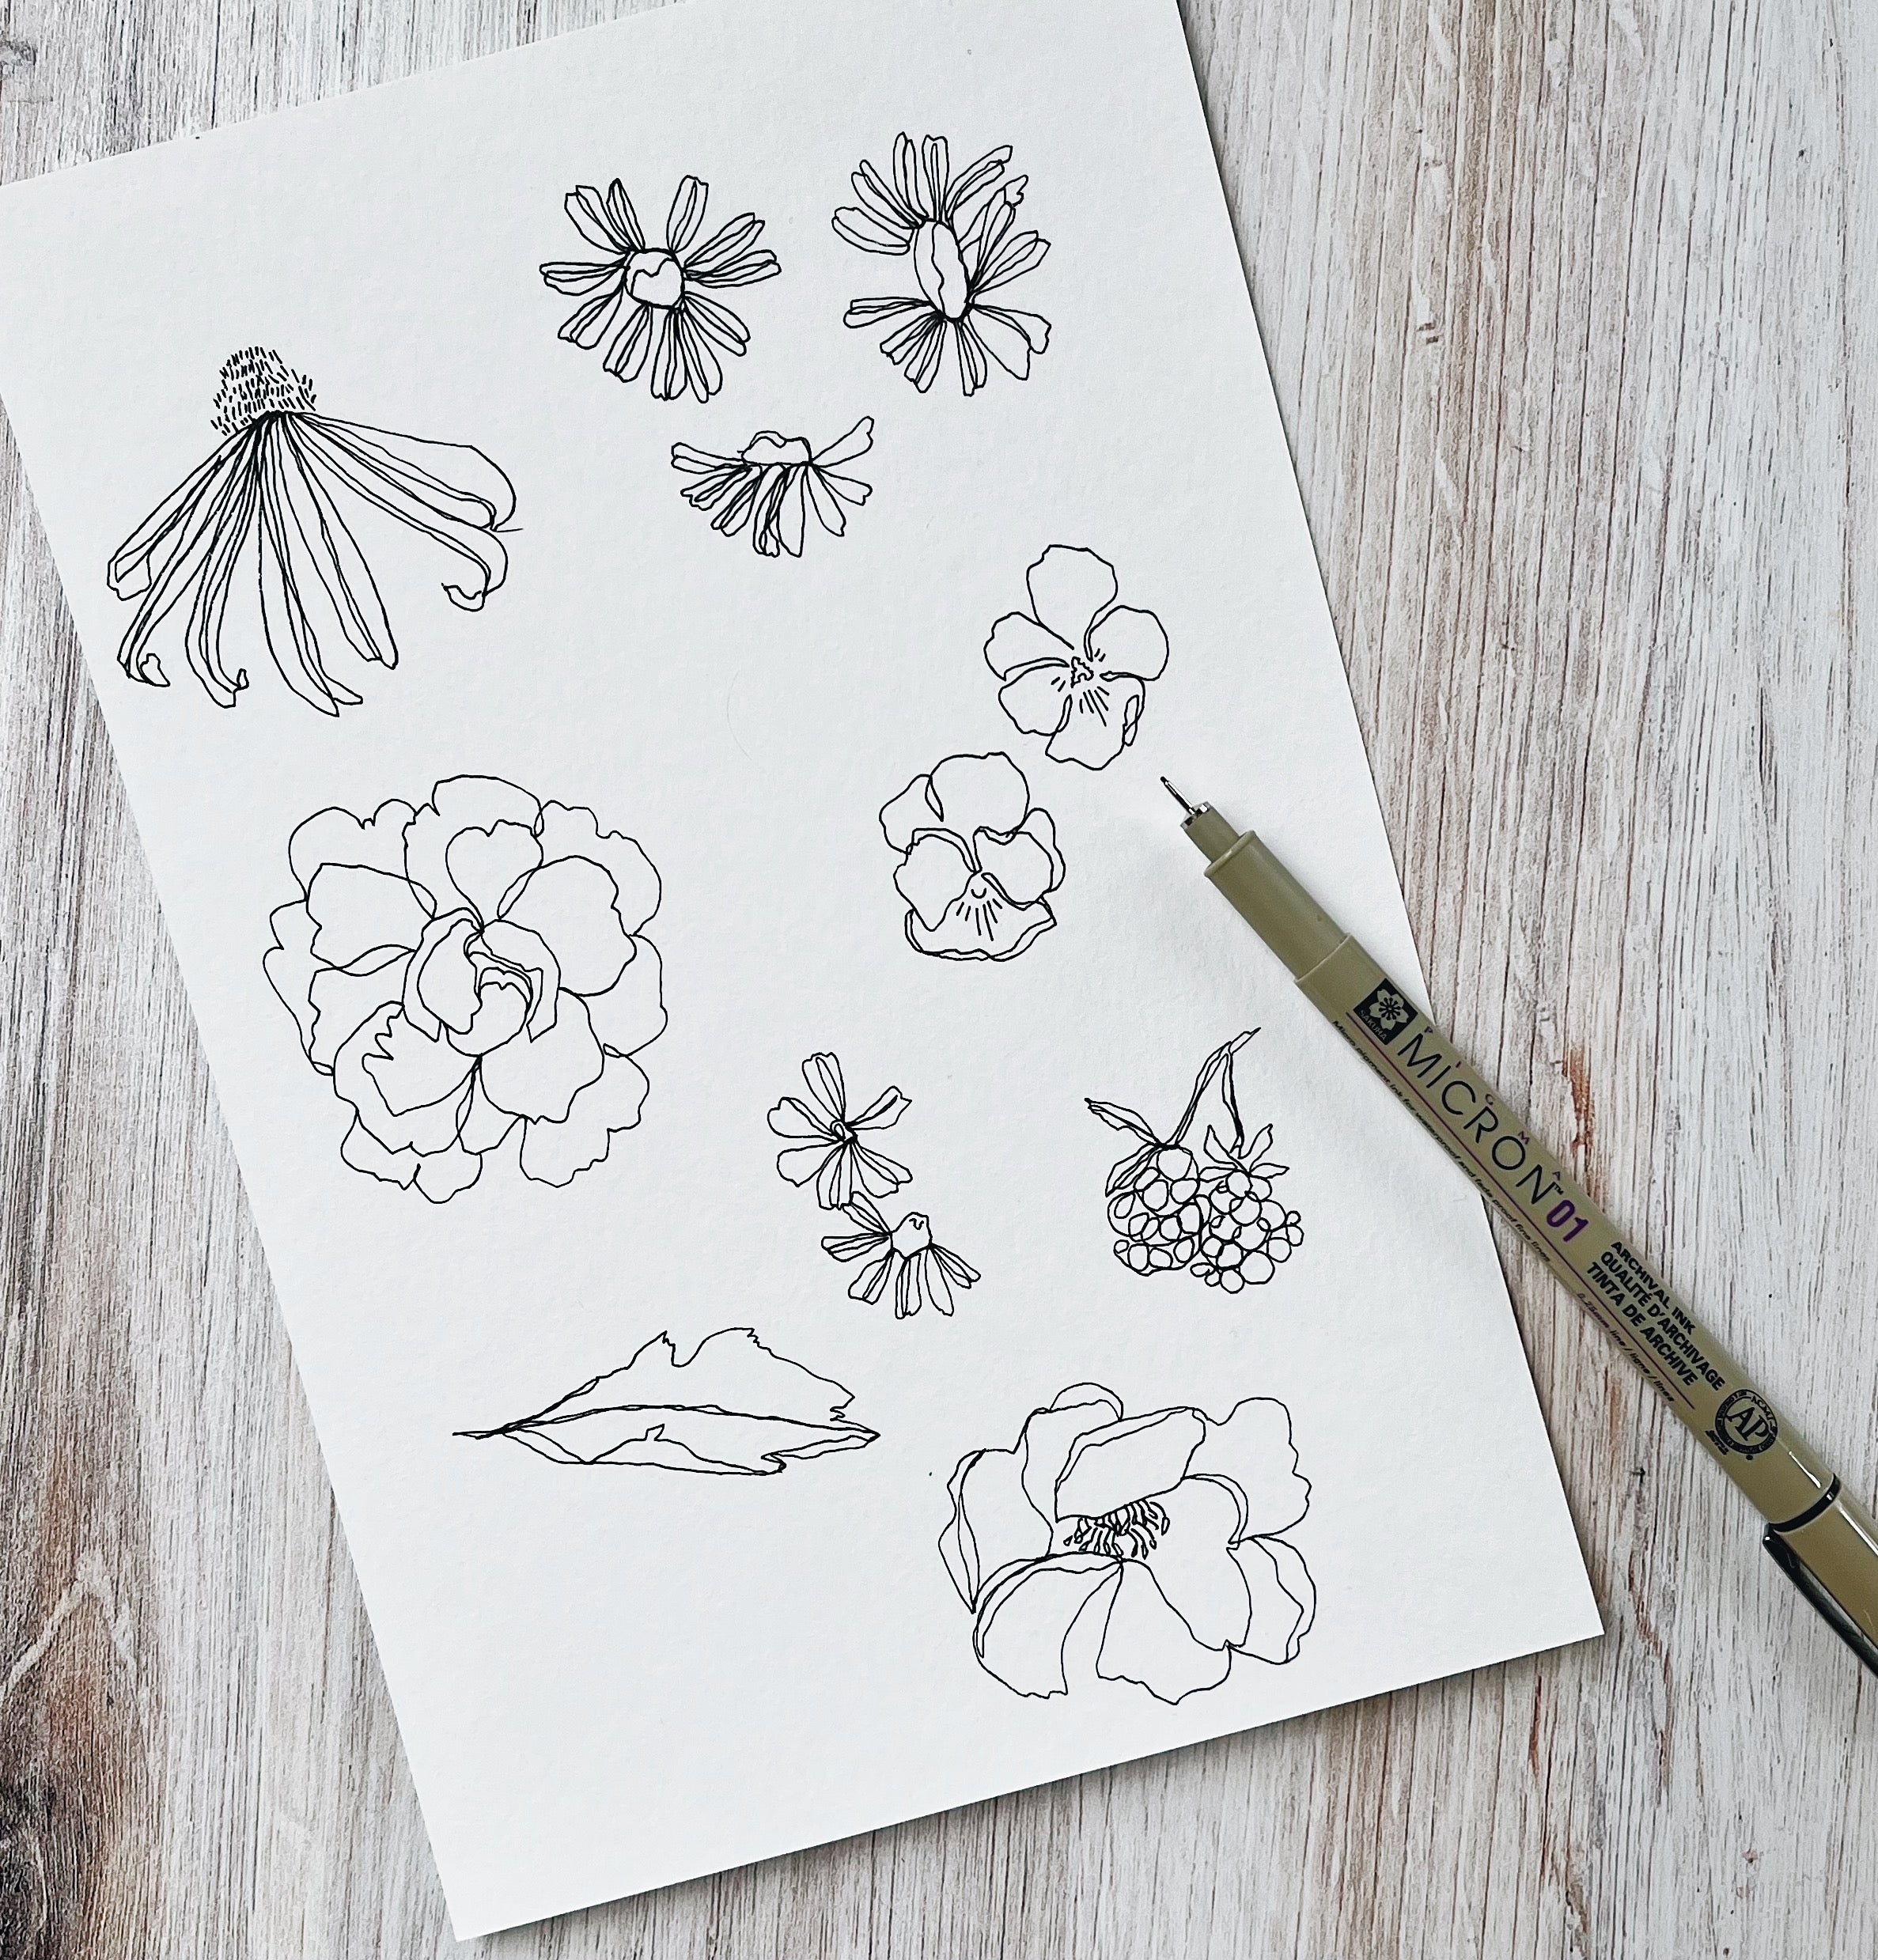 Alyona Creates - Hey Everyone! I am so excited to share a brand new  botanical watercolour workbook with you! This is the latest creation by  Sarah Simon @themintgardener. This book is filled